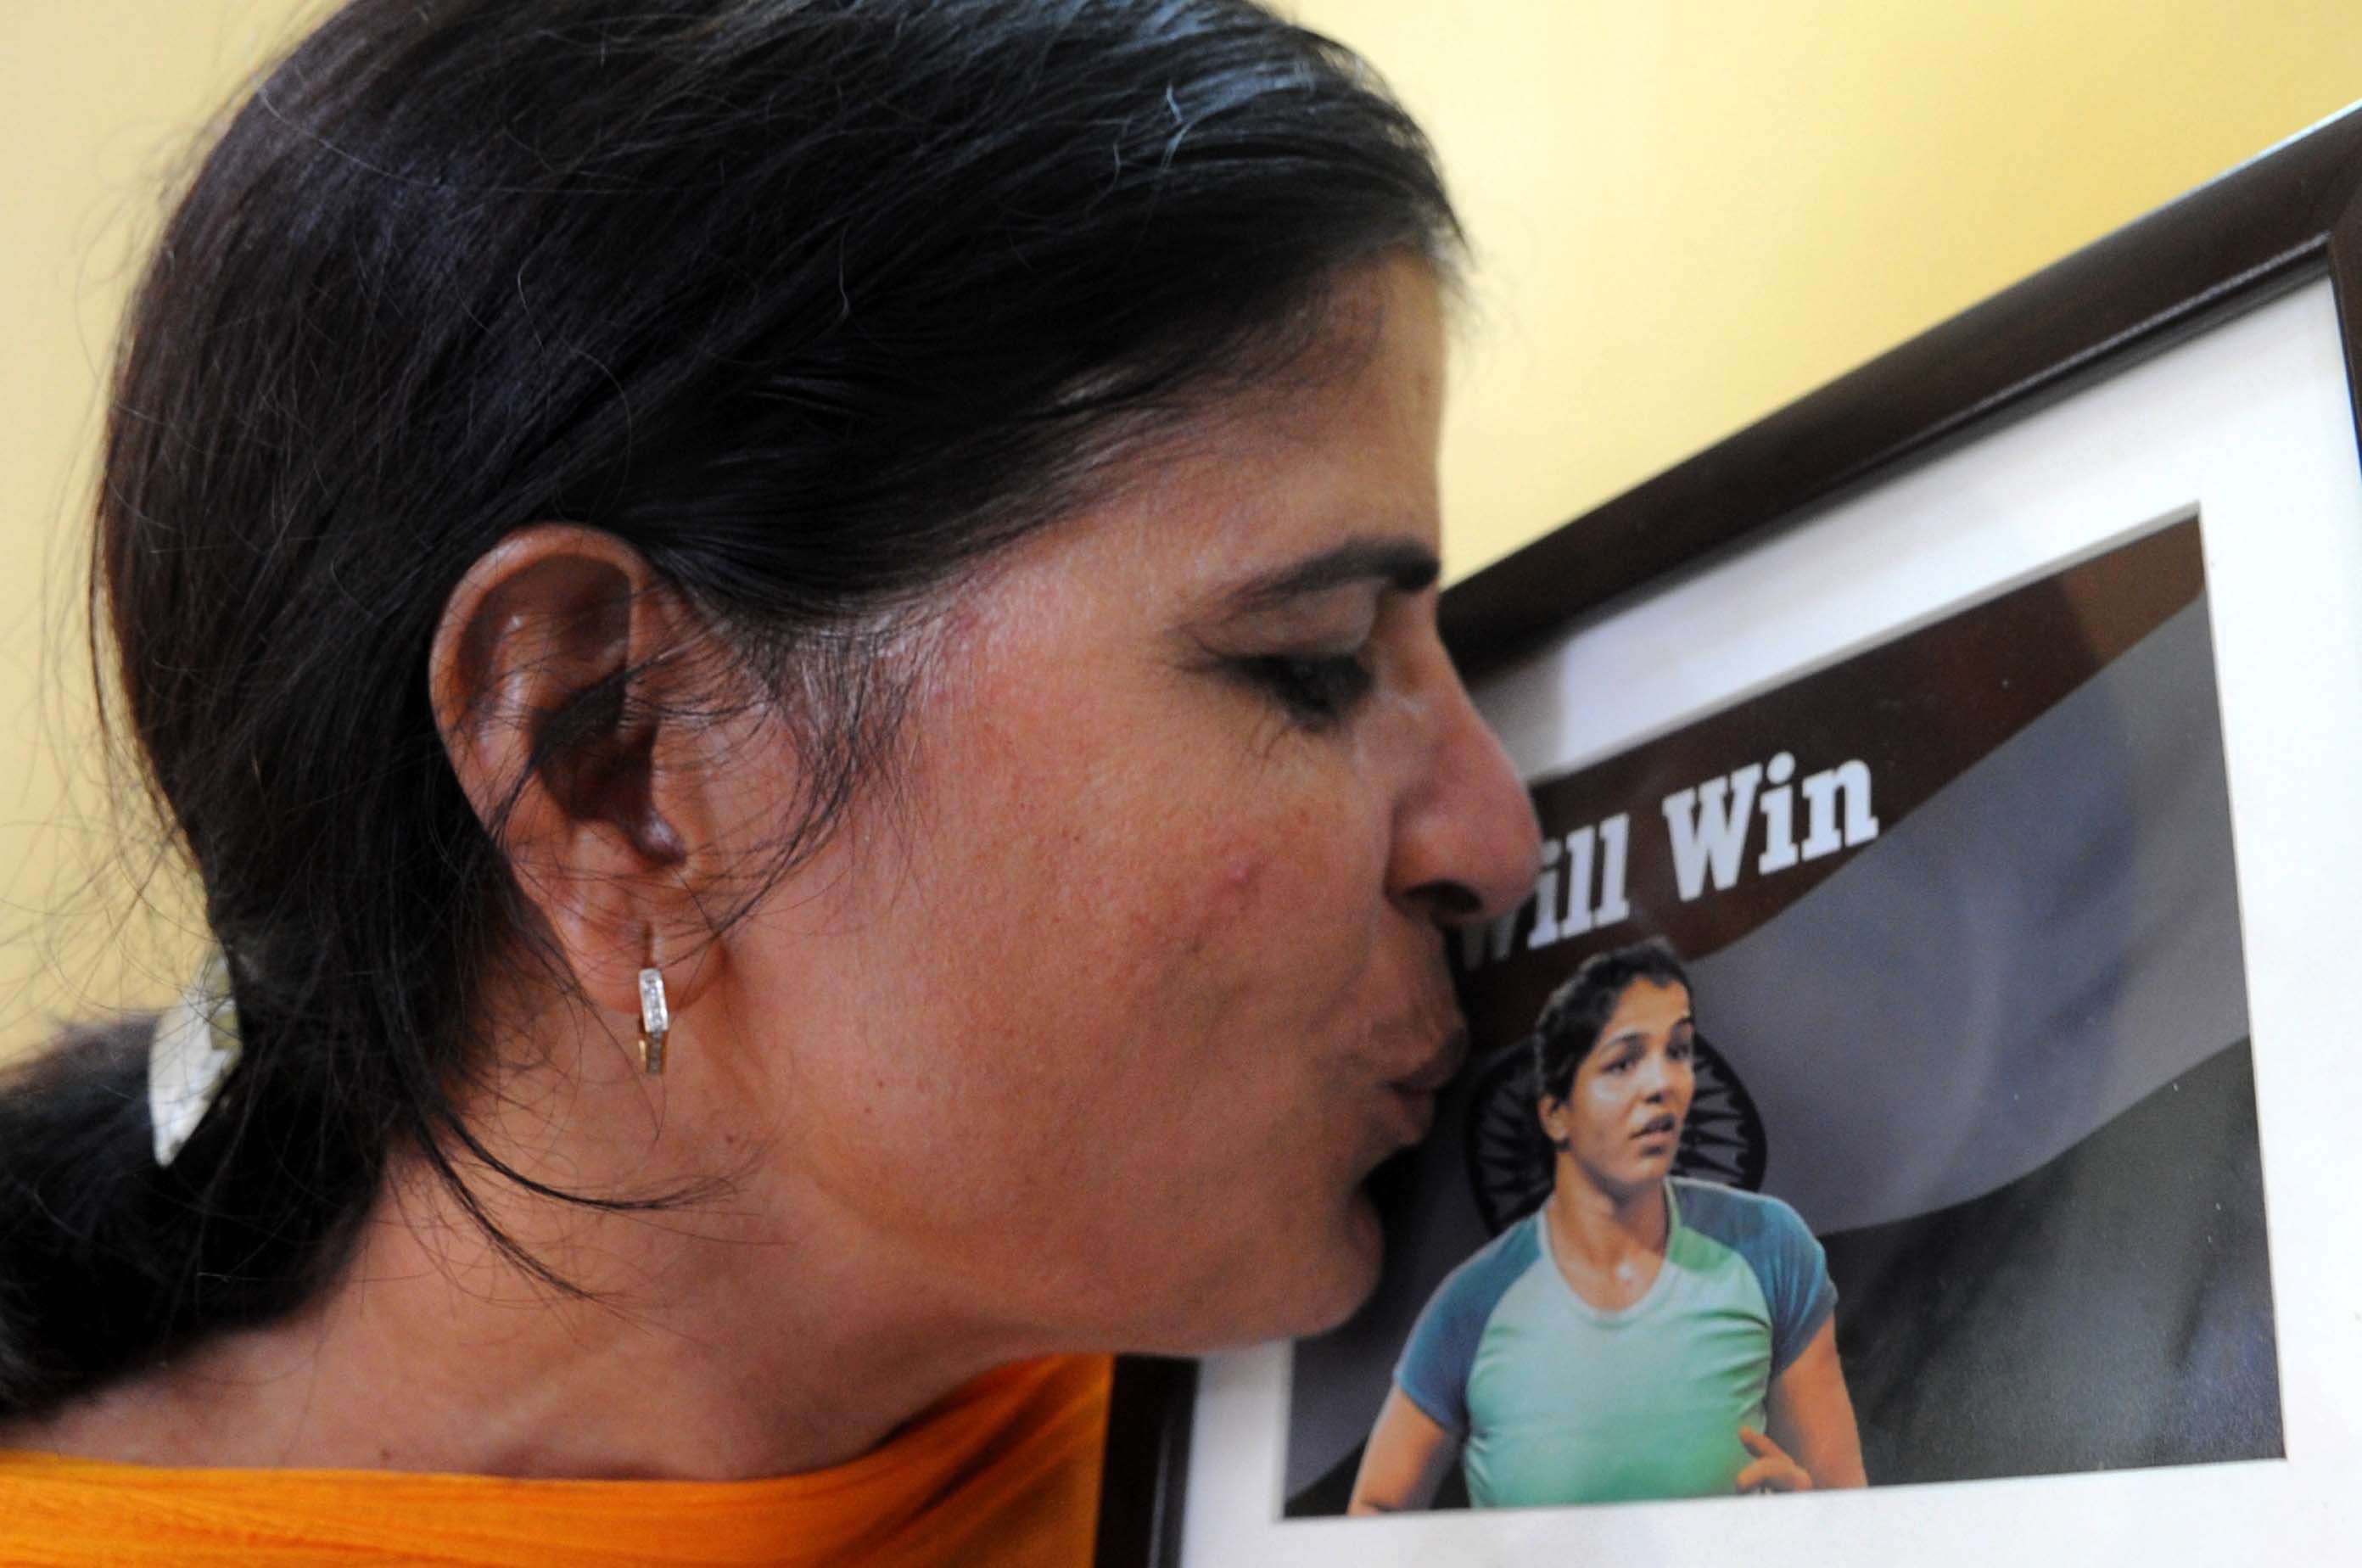 Sudesh,mother of Sakshi kisses her daughter's photo at their residence at Rohtak ,Haryana (approx 77 K.M)after wrestler Sakshi Malik ended India's painful wait for a medal at the Rio Olympic Games by clinching the bronze in the 58kg category.---------PIC BY ANINDYA CHATTOPADHYAY